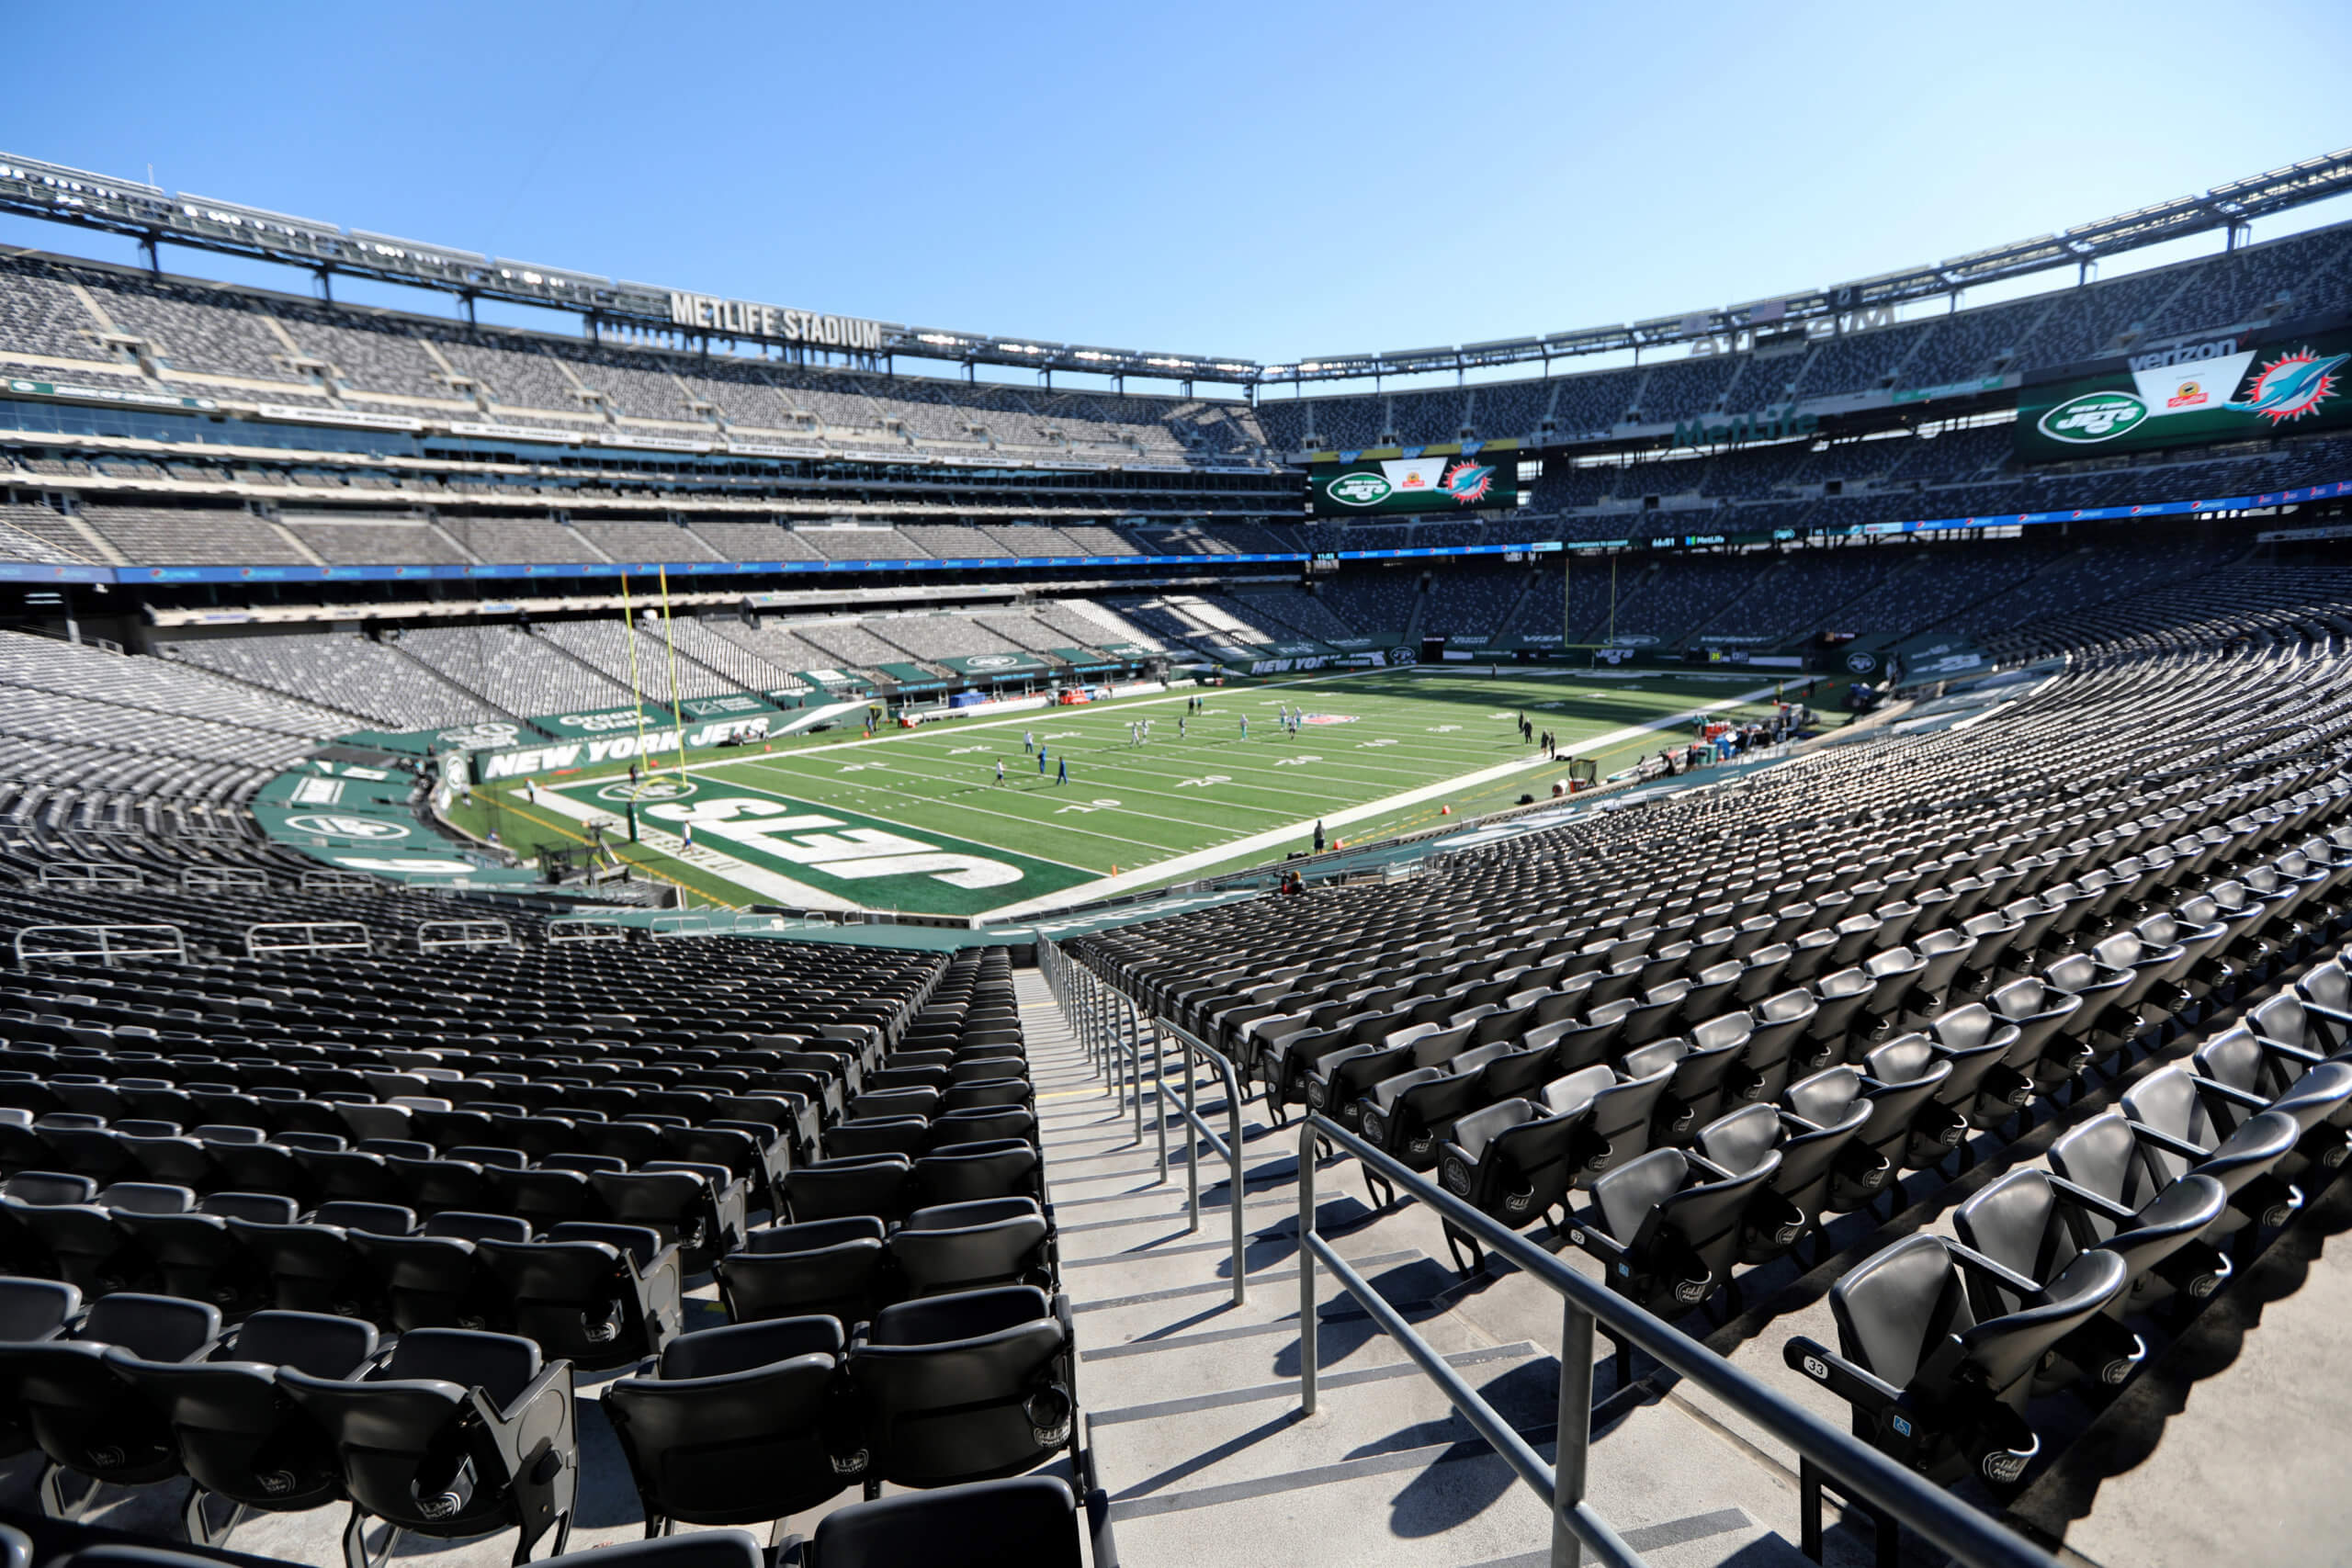 Fan's lawsuit demands the Giants, Jets return to NYC from New Jersey